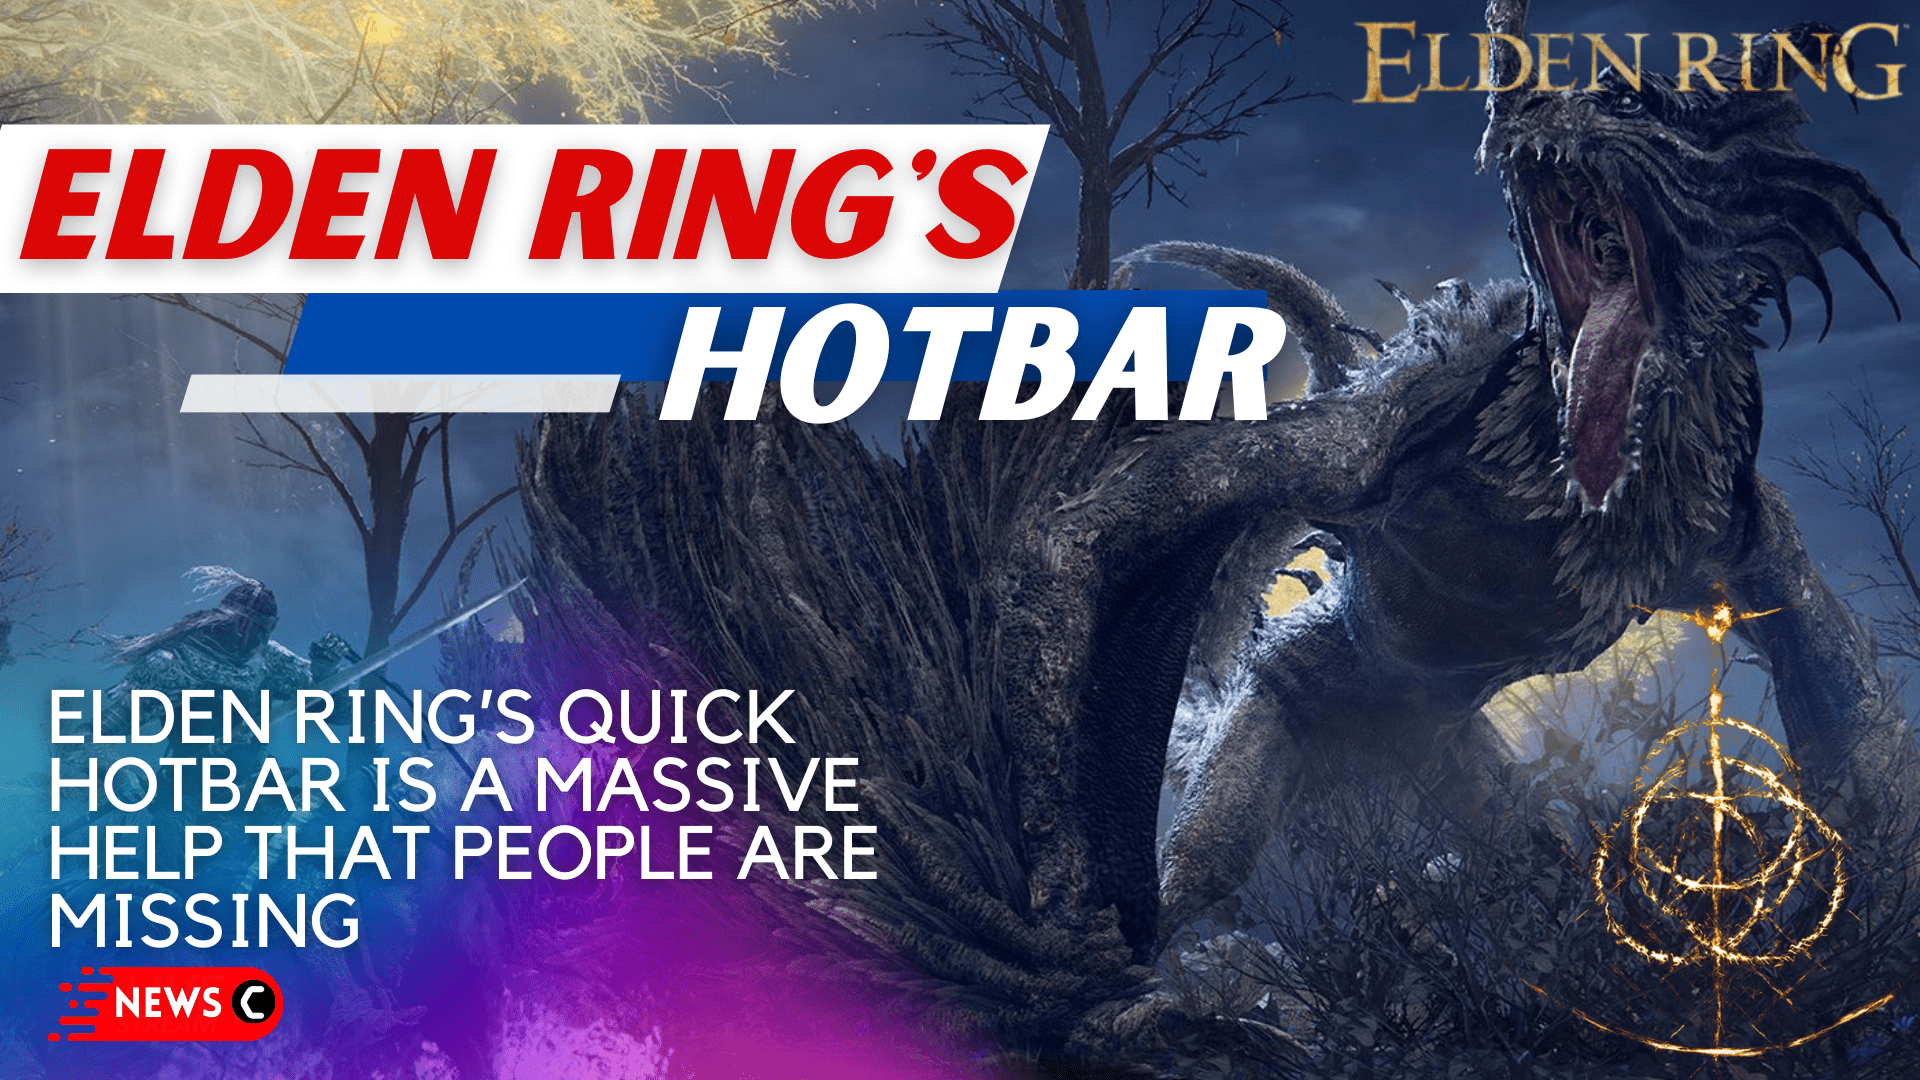 Elden Rings quick hotbar is a massive help that people are missing